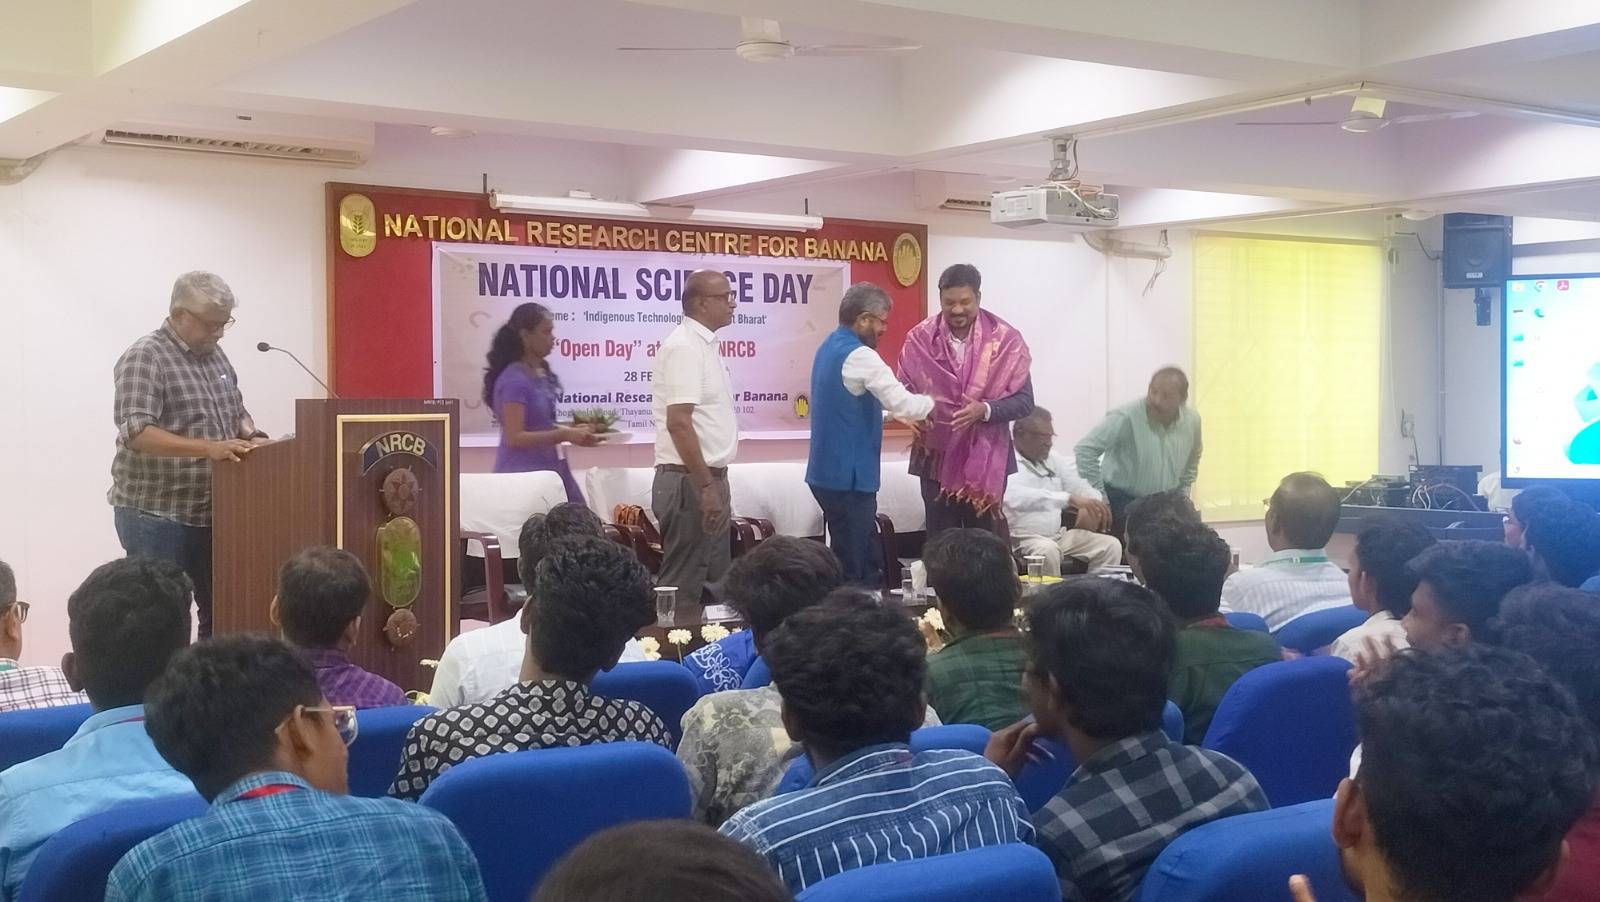 National Science Day in ICR National Research Centre for Banana